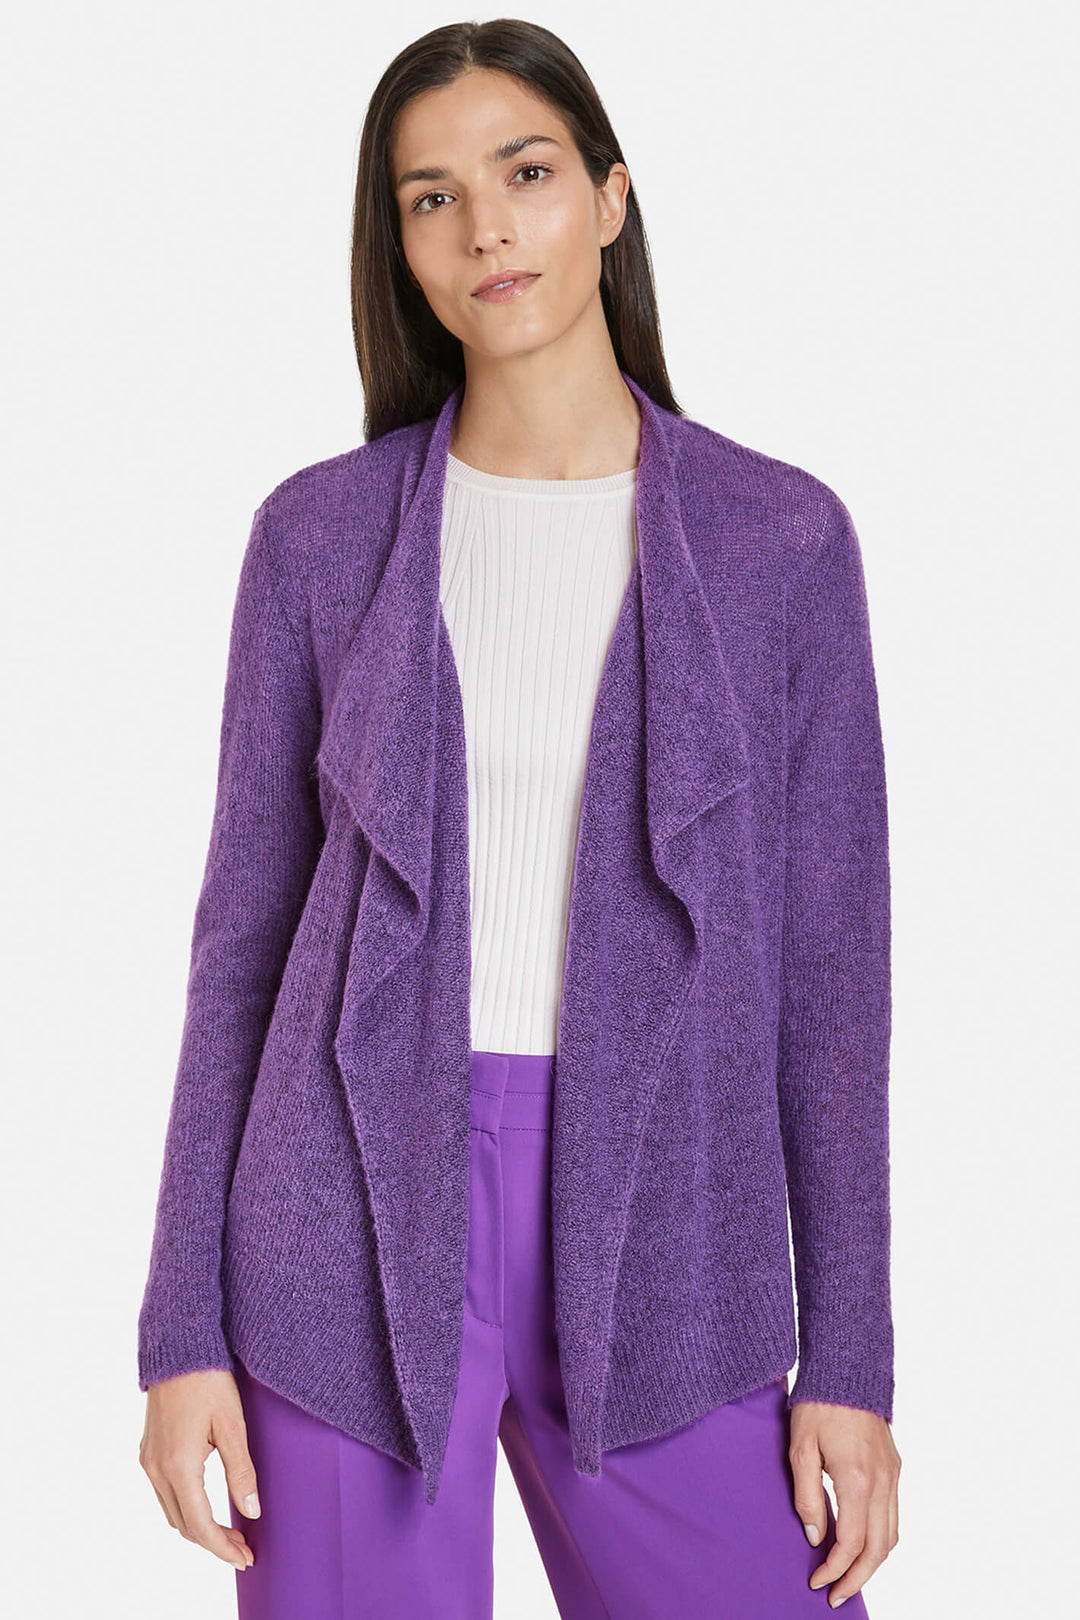 Gerry Weber 230008 Purple Waterfall Jacket - Experience Boutique